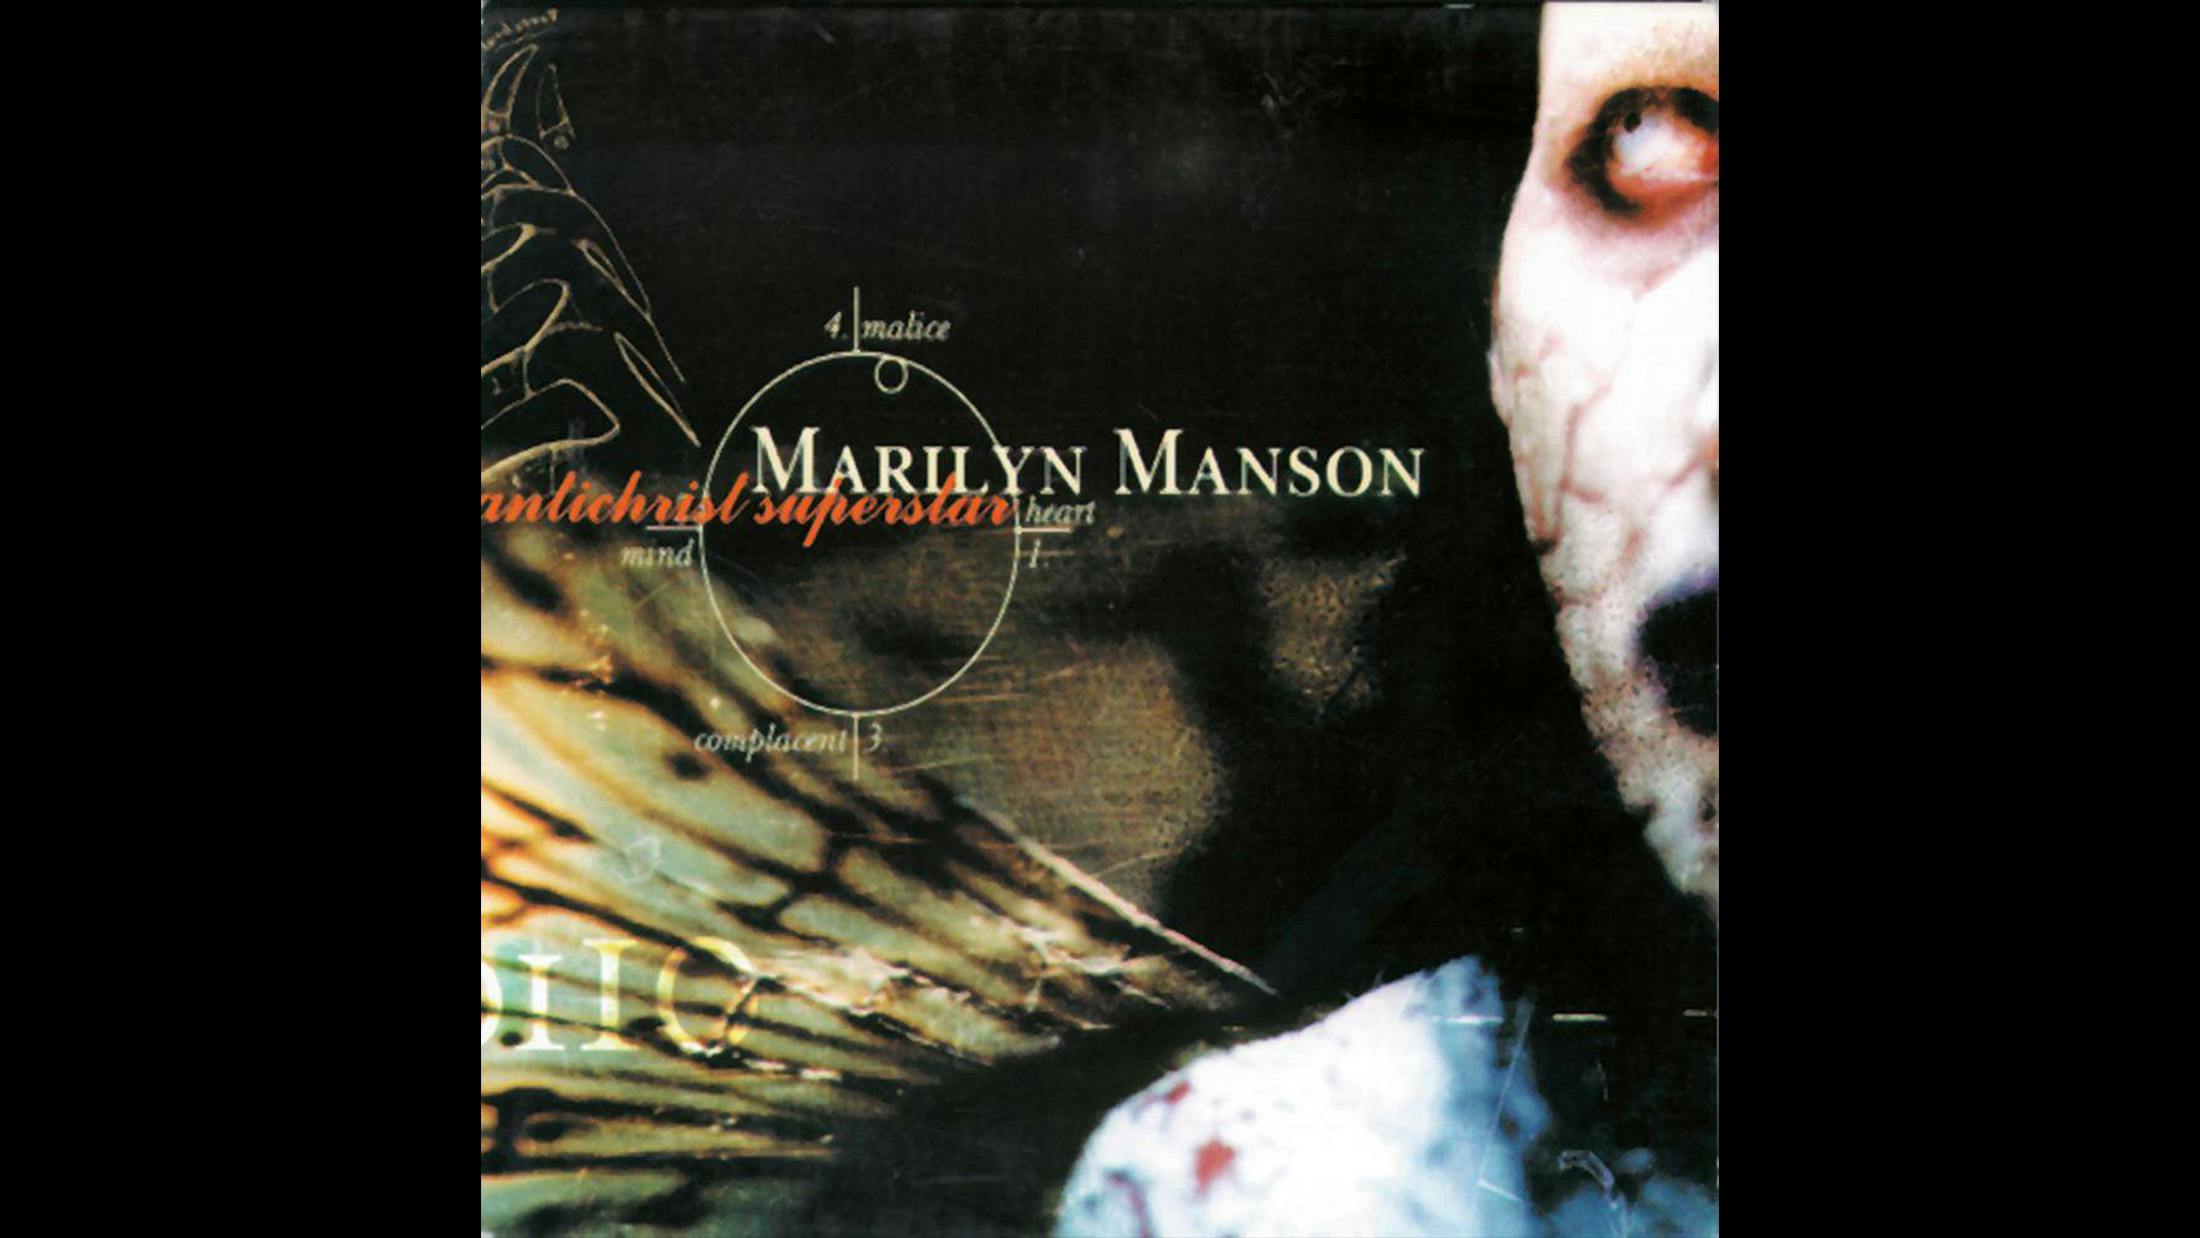 Manson’s revelatory breakthrough album, an elaborate rock opera. “People might think that this is the definitive Marilyn Manson record,” he acknowledges. “It was a tough time making it, though. New Orleans is a dark, sinister place. I remember Jonathan Davis from Korn came to stay with me there to get sober… bad idea. Objectively I can see that it’s an important album.”